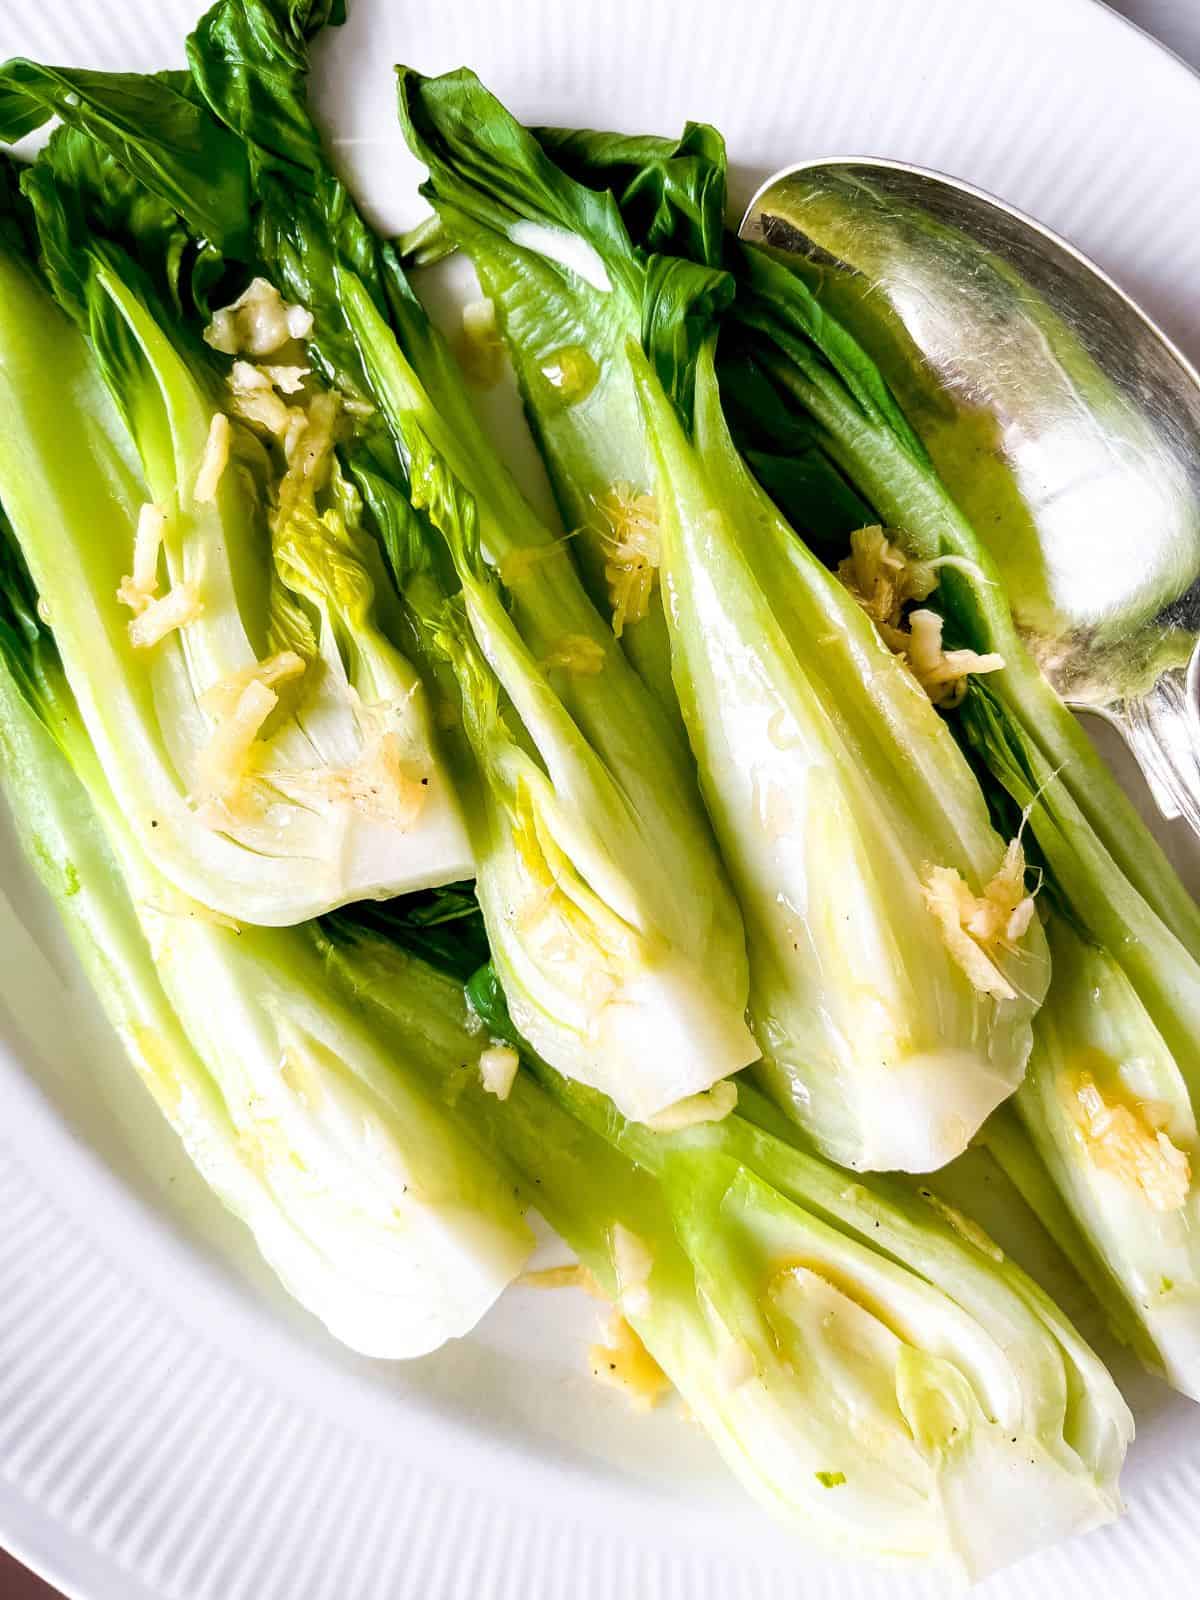 Steamed pak choi on a plate.